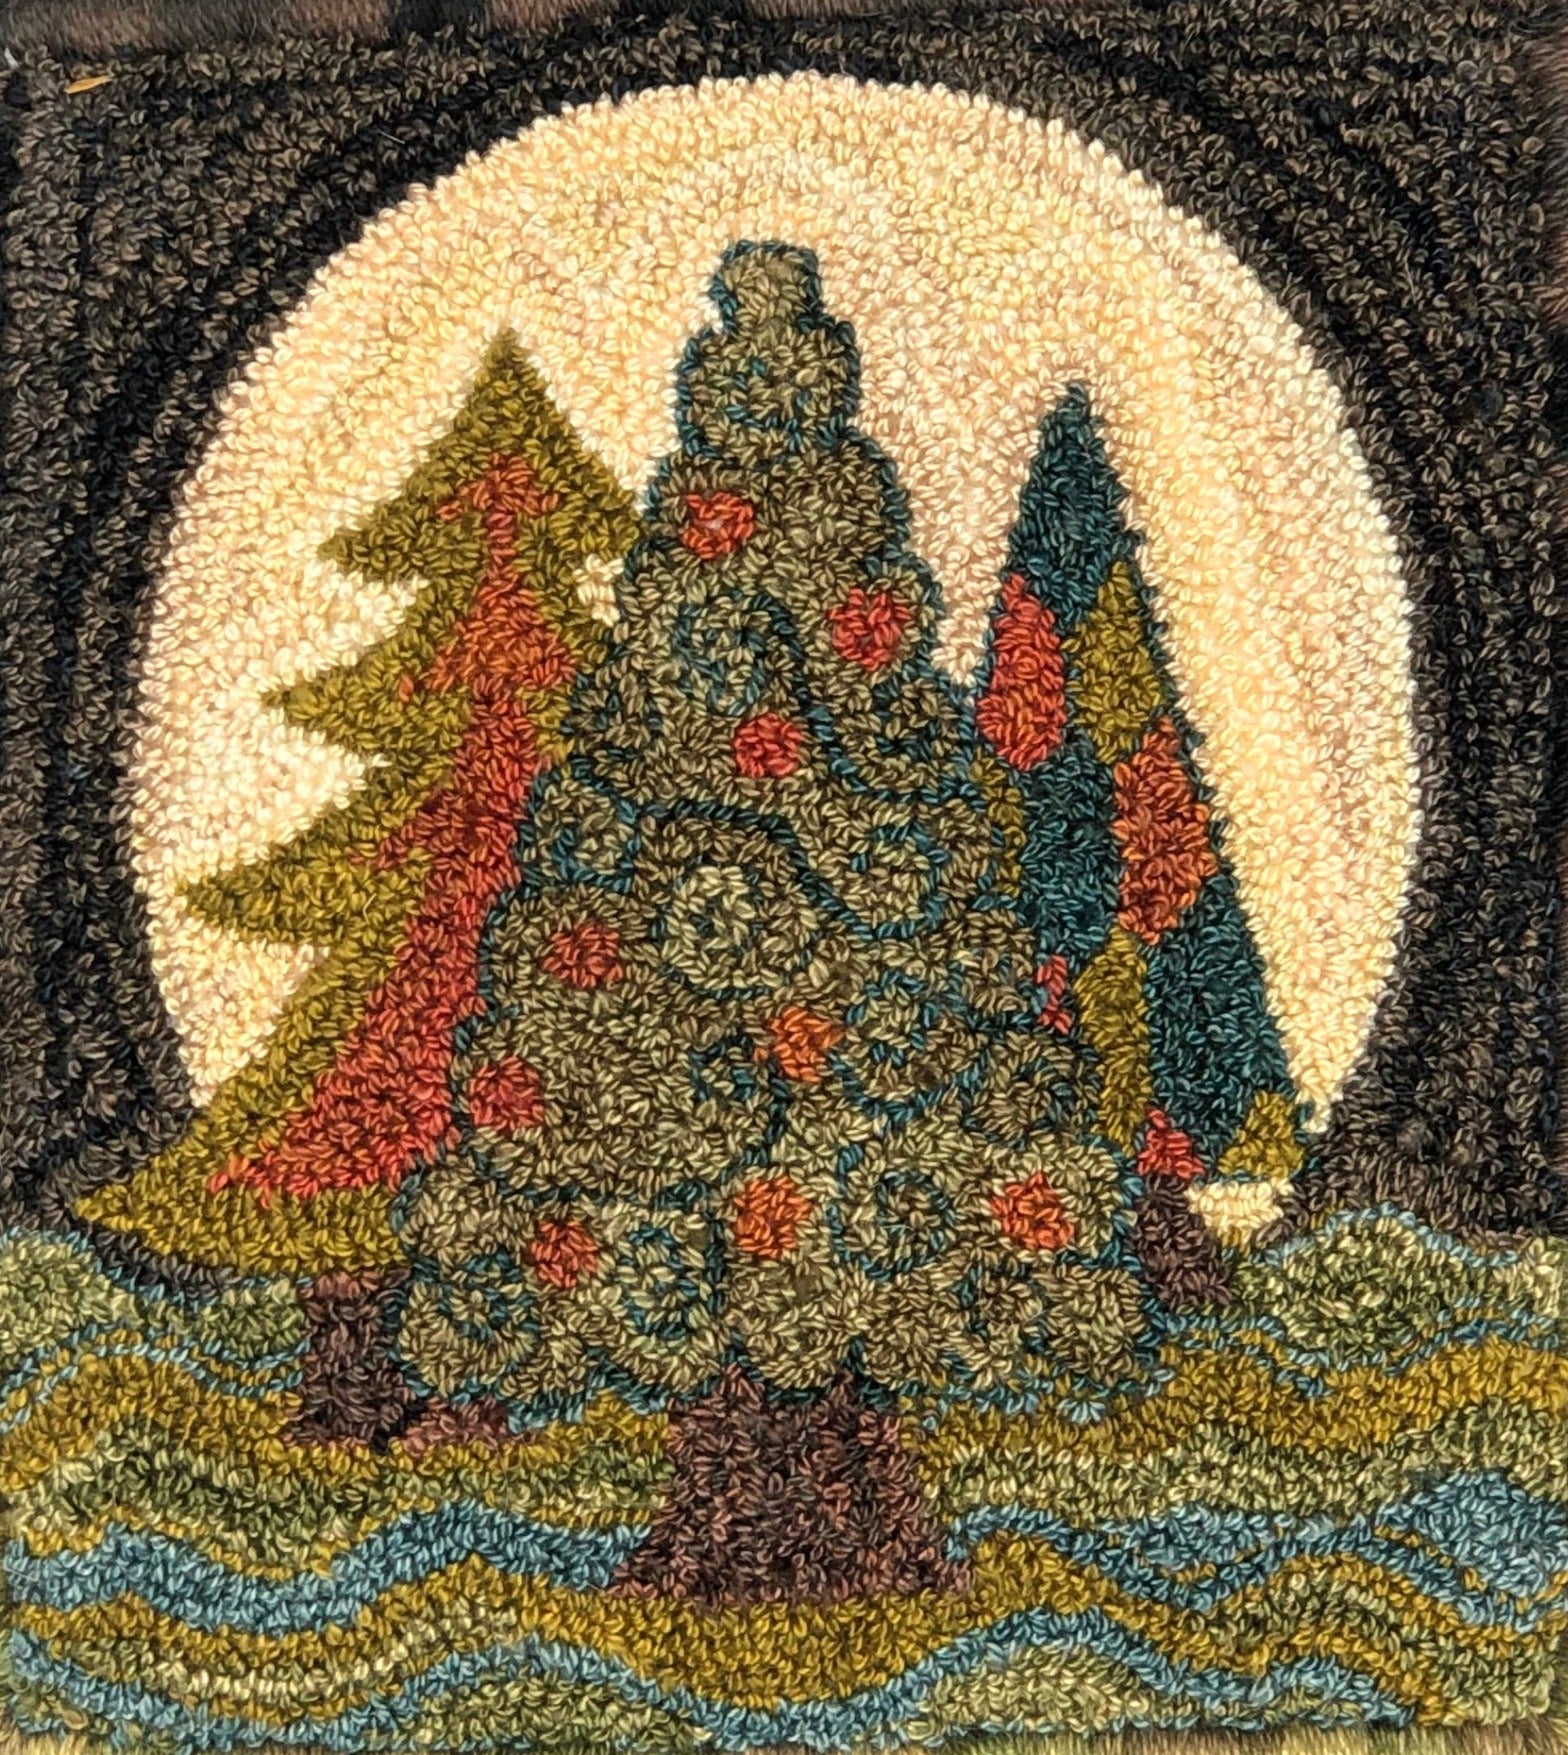 Moon Trees Pattern on Linen for Rug Hooking or Rug Punch Needle by Orphaned Wool. This lovely design is hand drawn on quality linen. Enjoy these colorful trees highlighted by the moon.